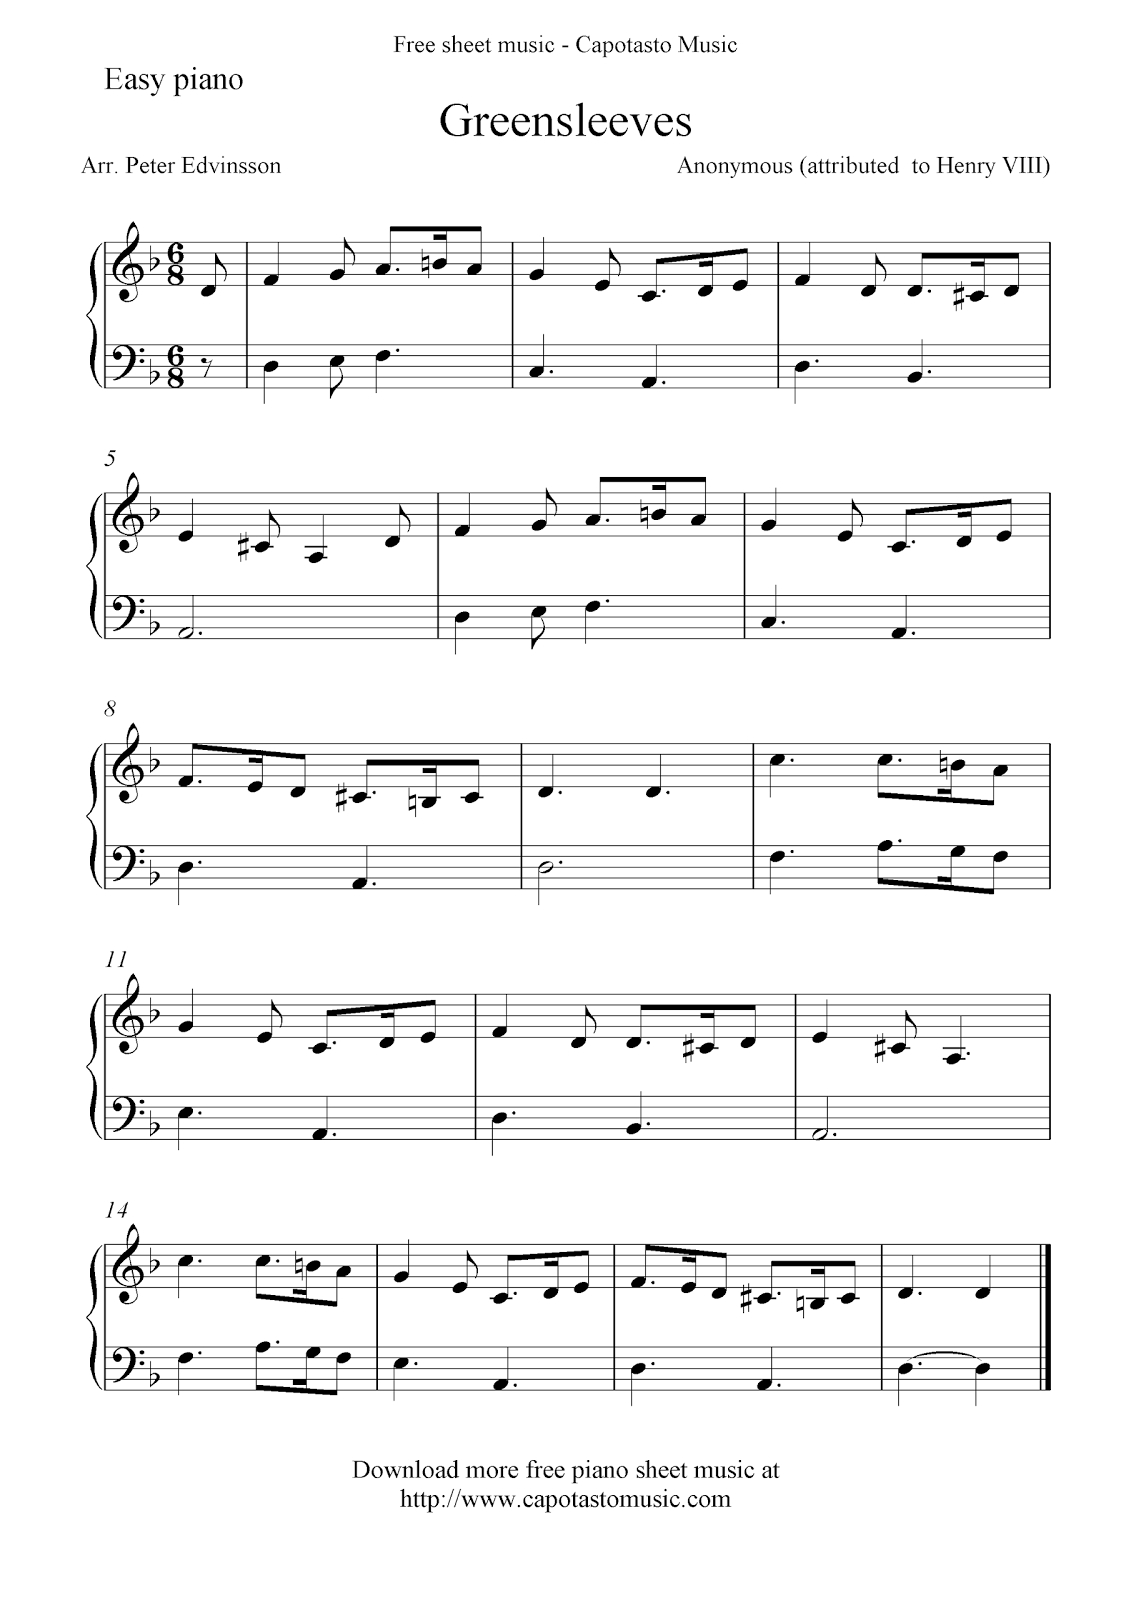 Free Sheet Music Scores: Free Piano Sheet Music Notes, Greensleeves - Free Printable Classical Sheet Music For Piano